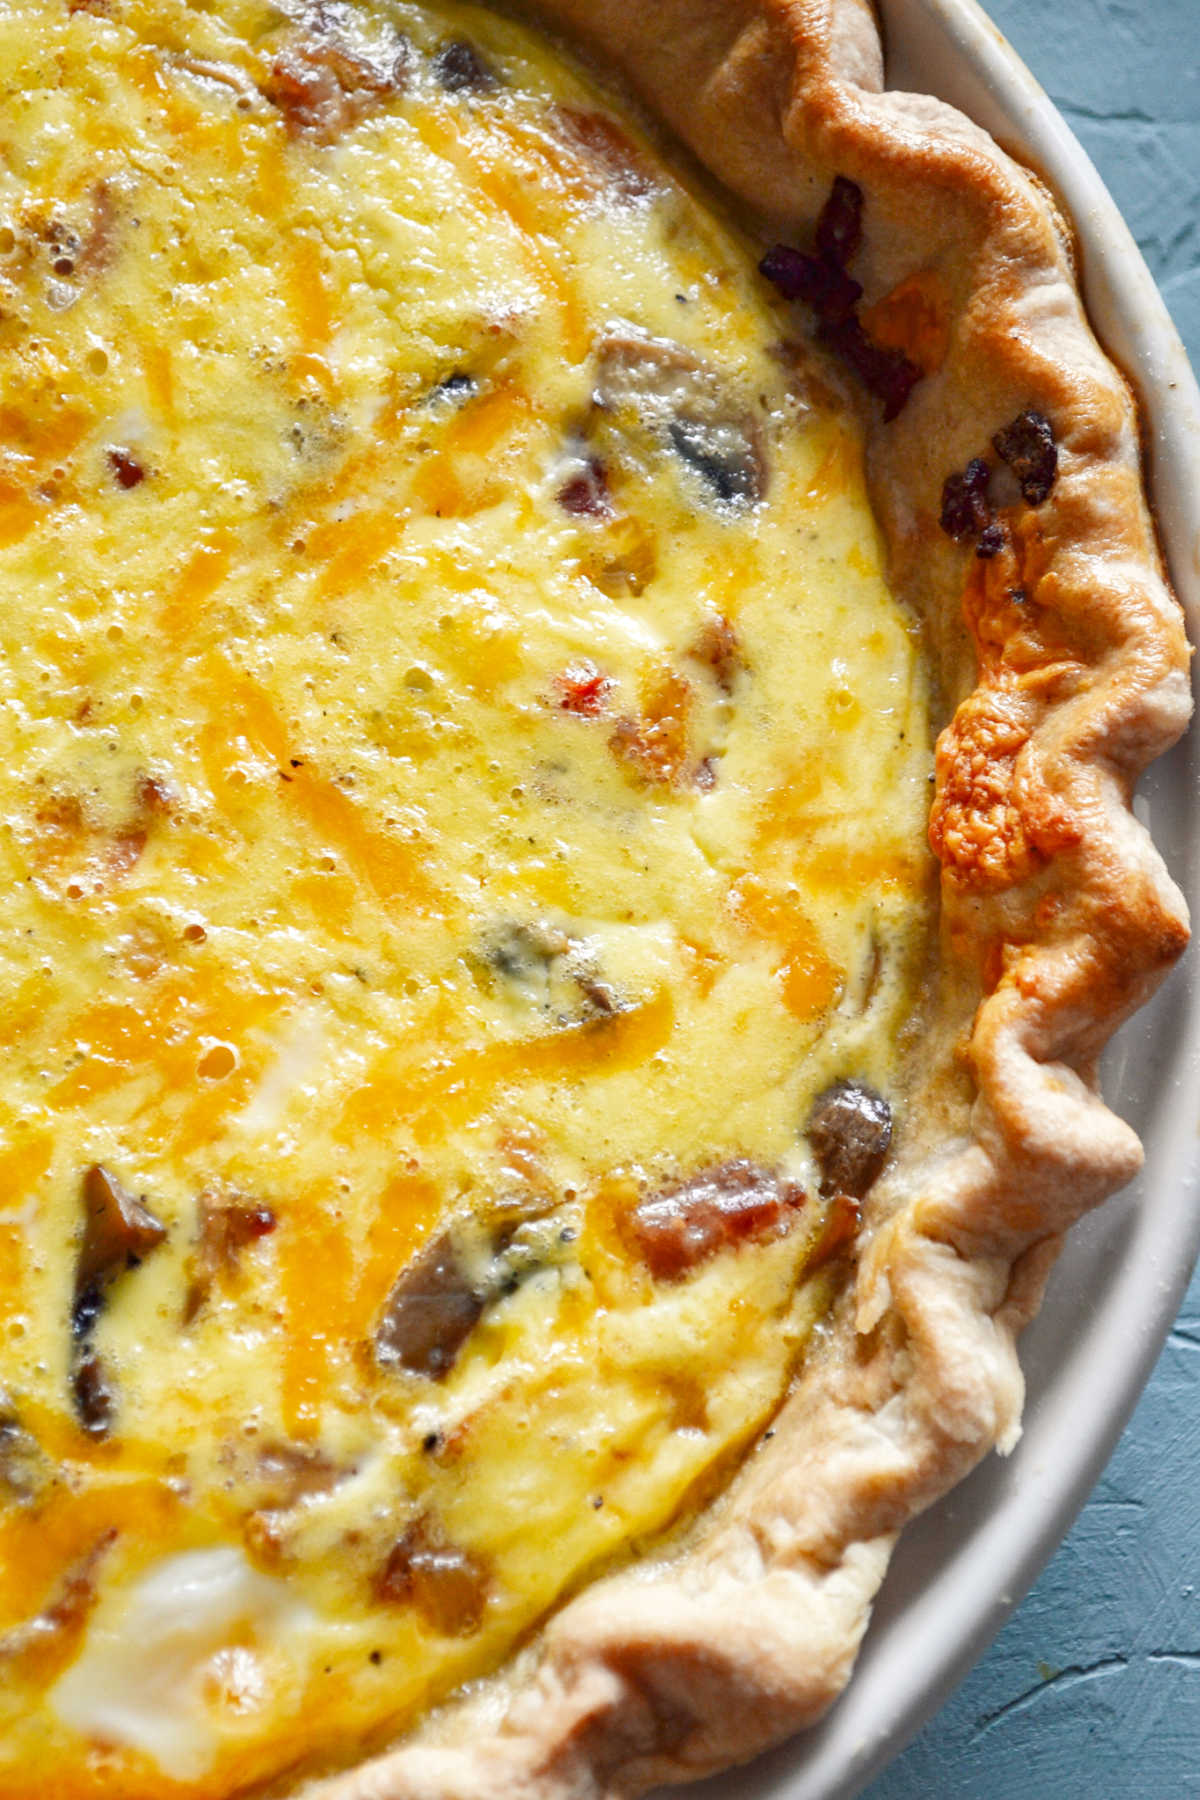 Looking down on freshly baked bacon quiche with peppers and mushrooms.